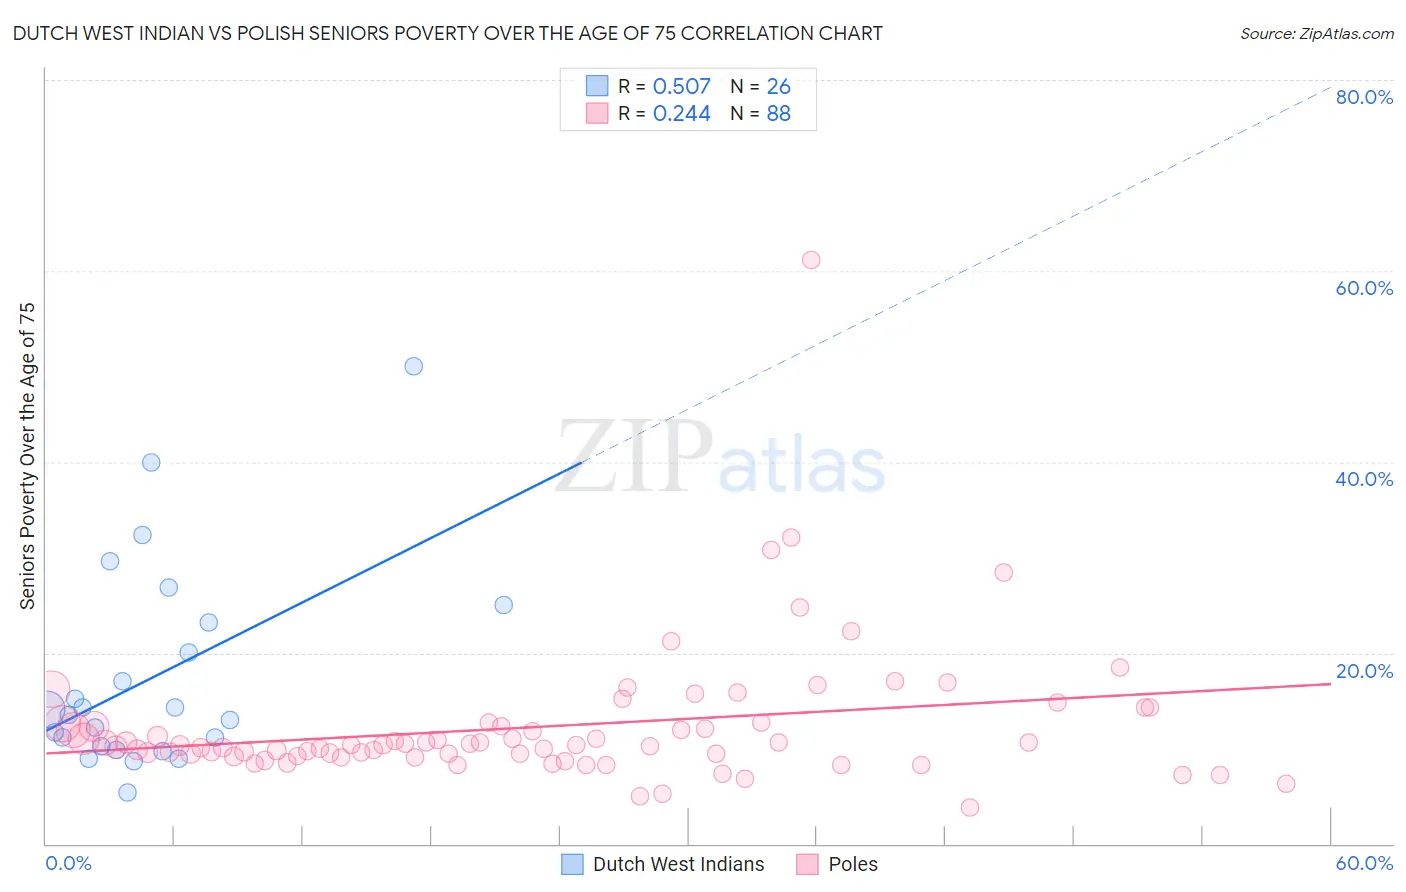 Dutch West Indian vs Polish Seniors Poverty Over the Age of 75